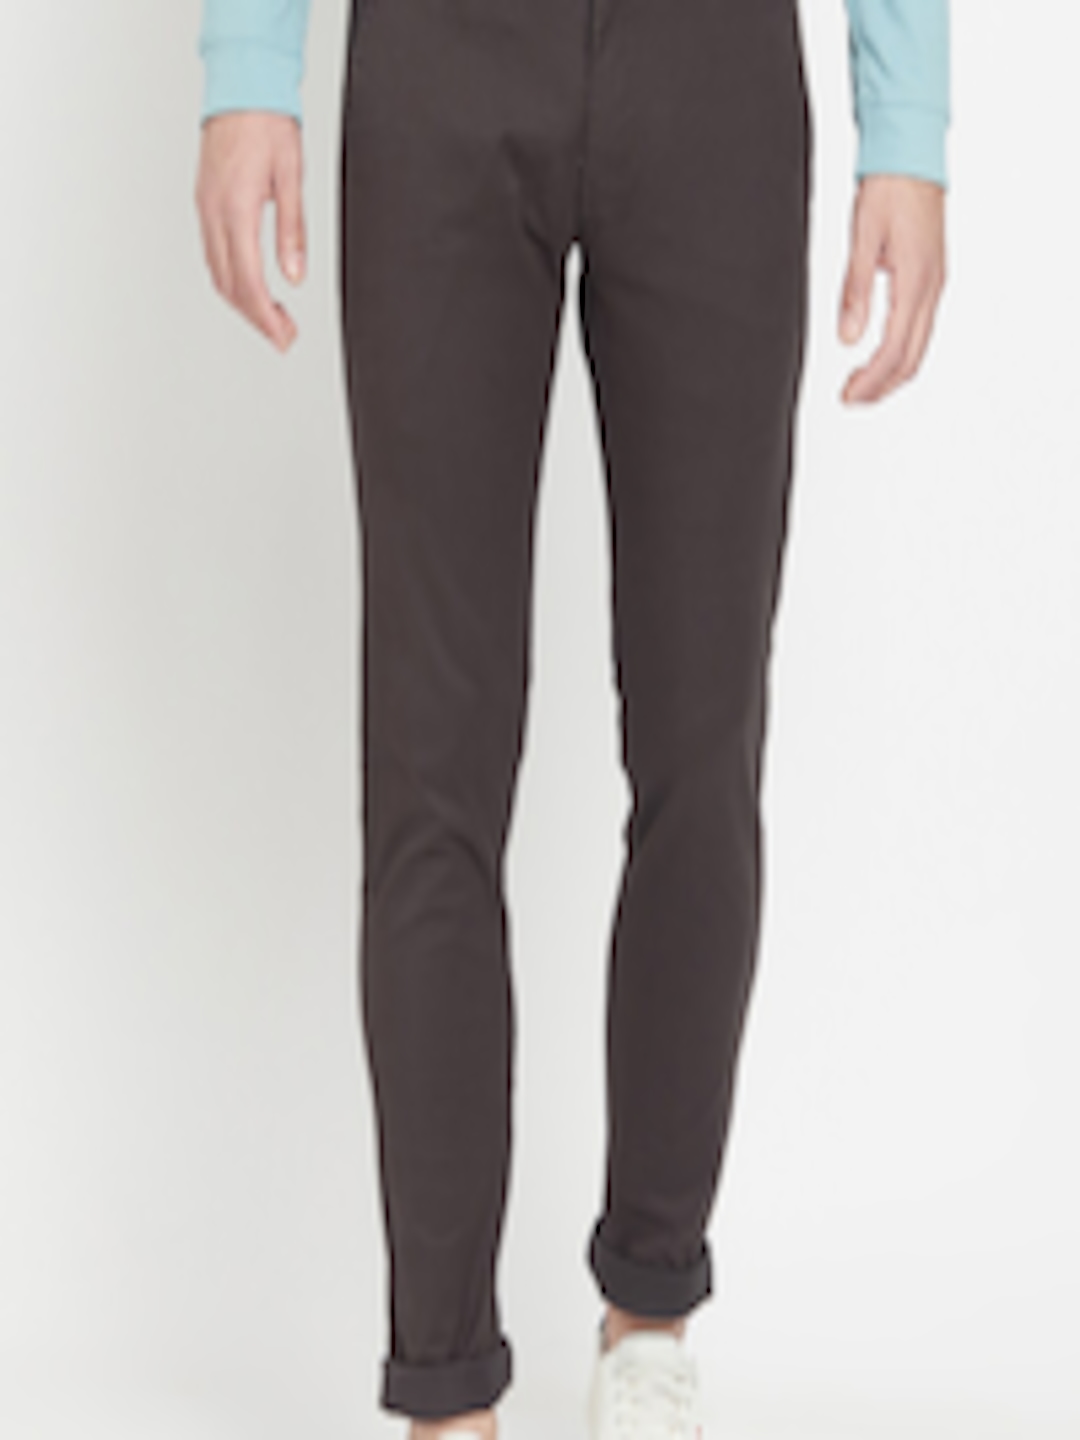 Buy Octave Men Brown Trousers - Trousers for Men 15935424 | Myntra